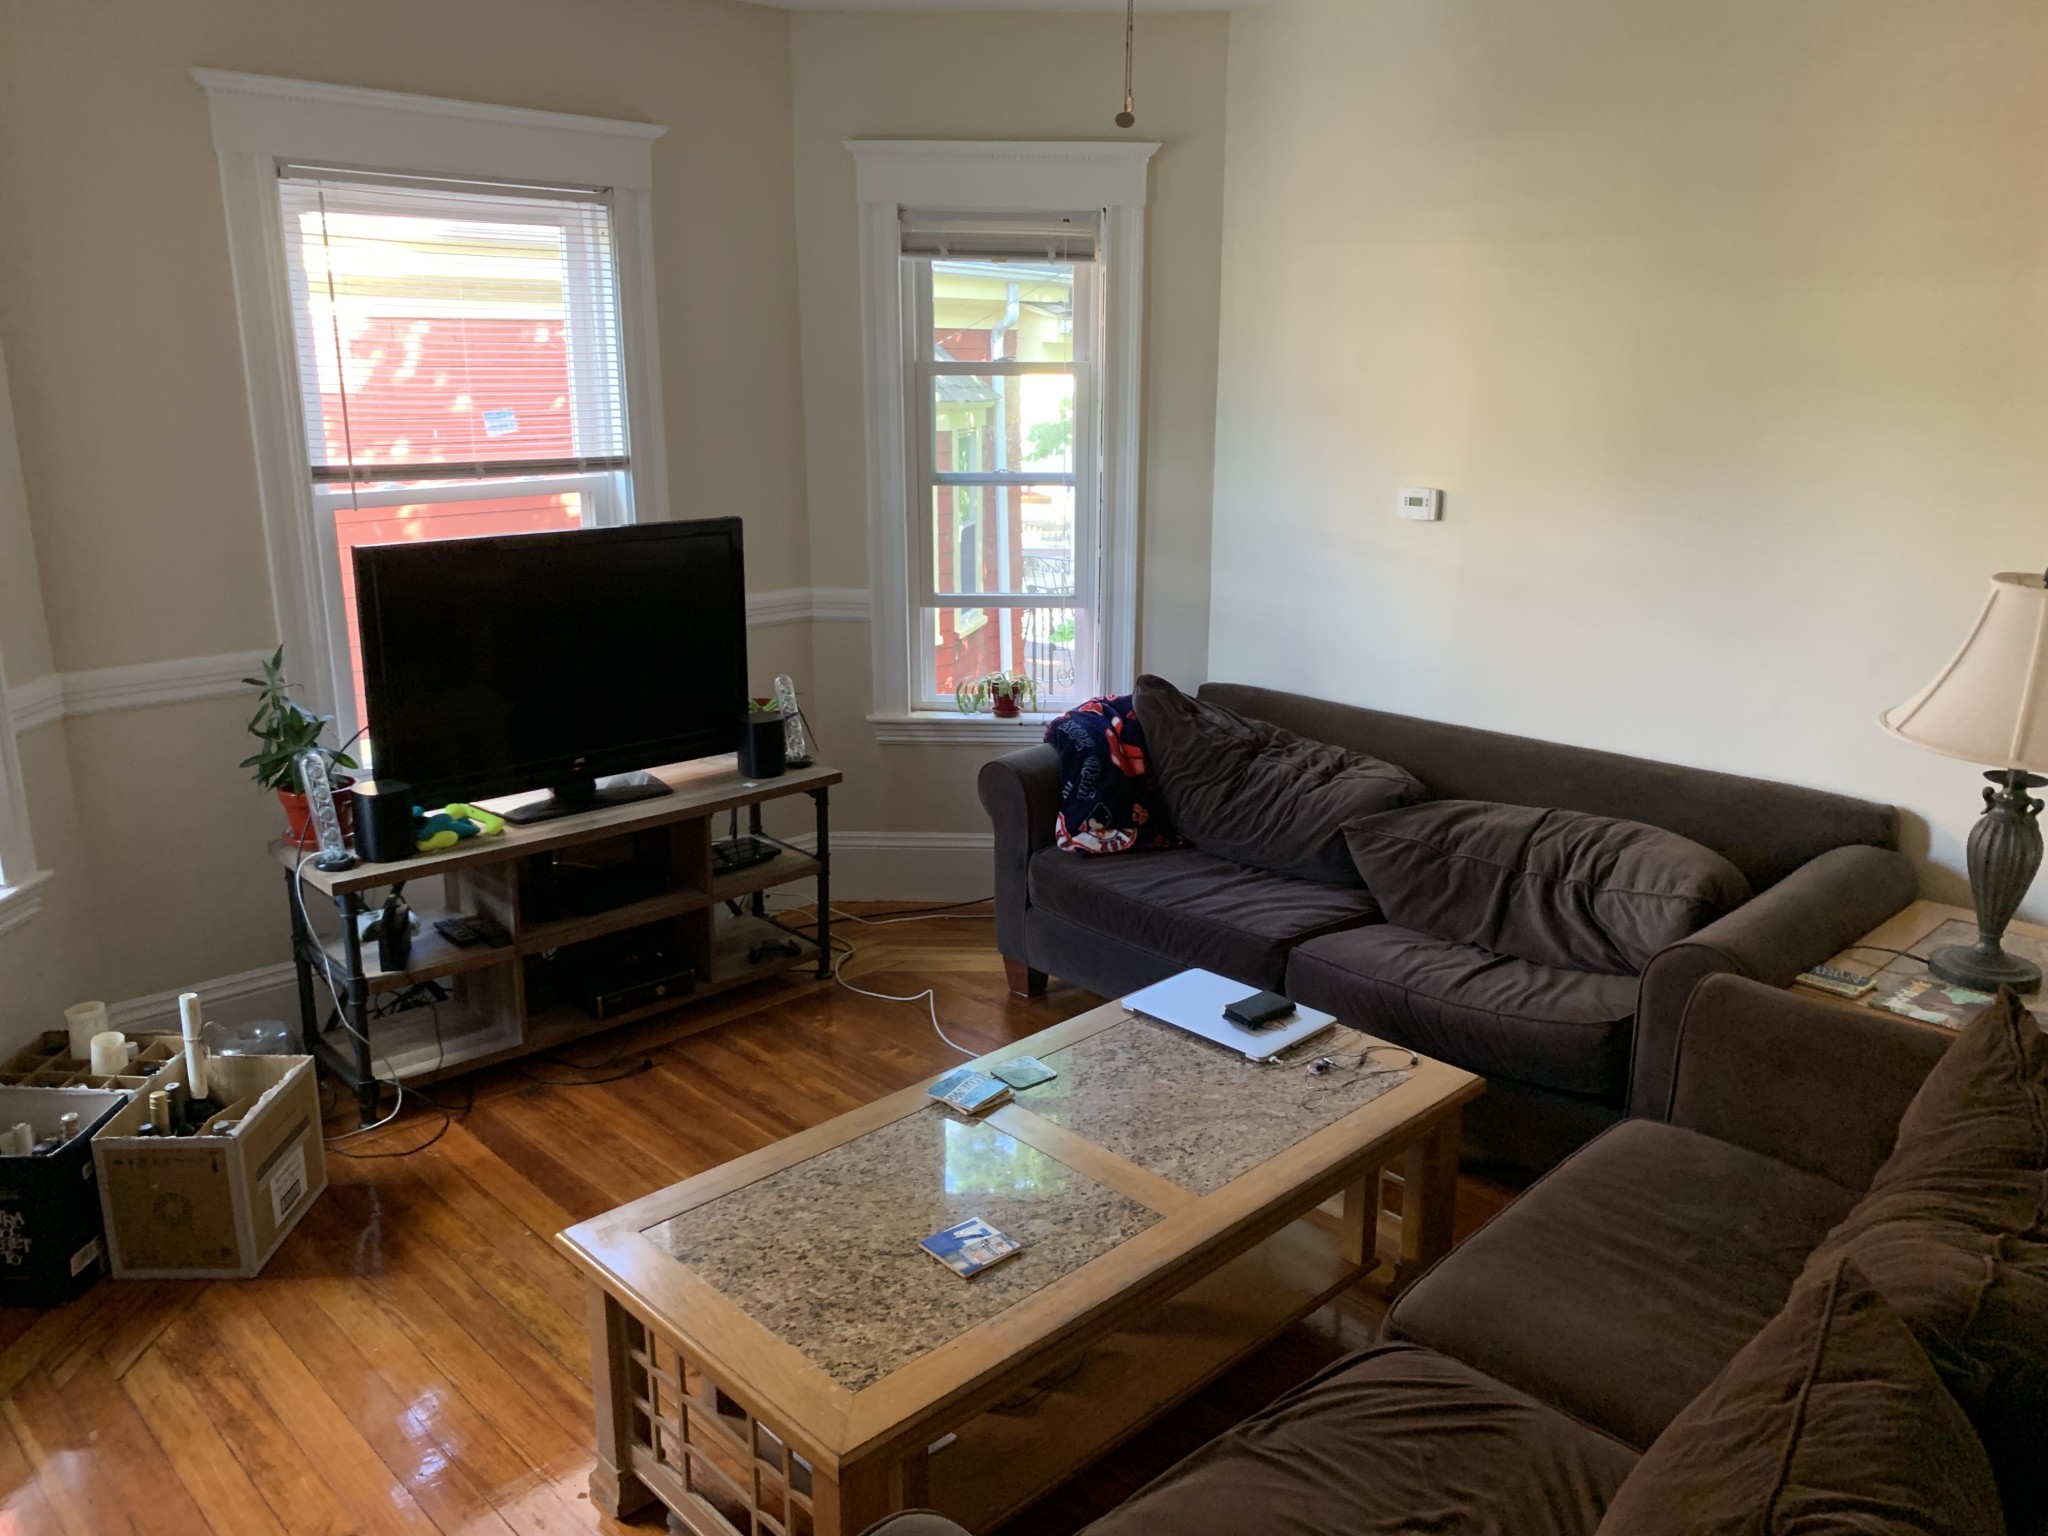 Photos of apartment on Broadway,Somerville MA 02144